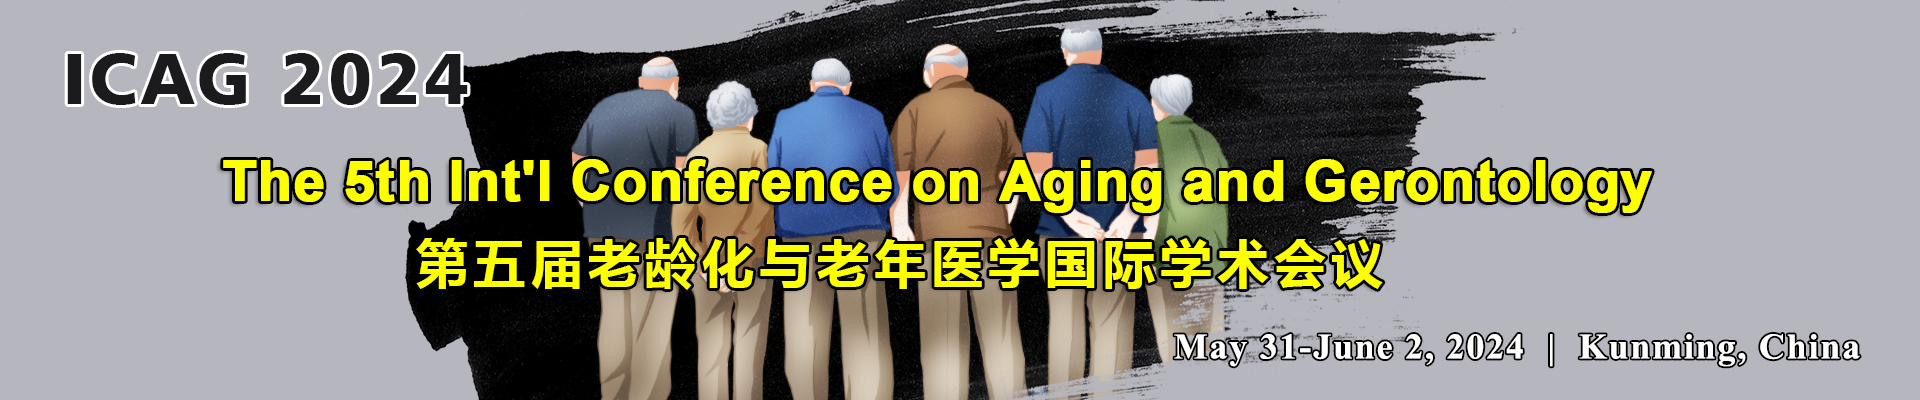 The 5th Int'l Conference on Aging and Gerontology (ICAG 2024), Kunming, Yunnan, China